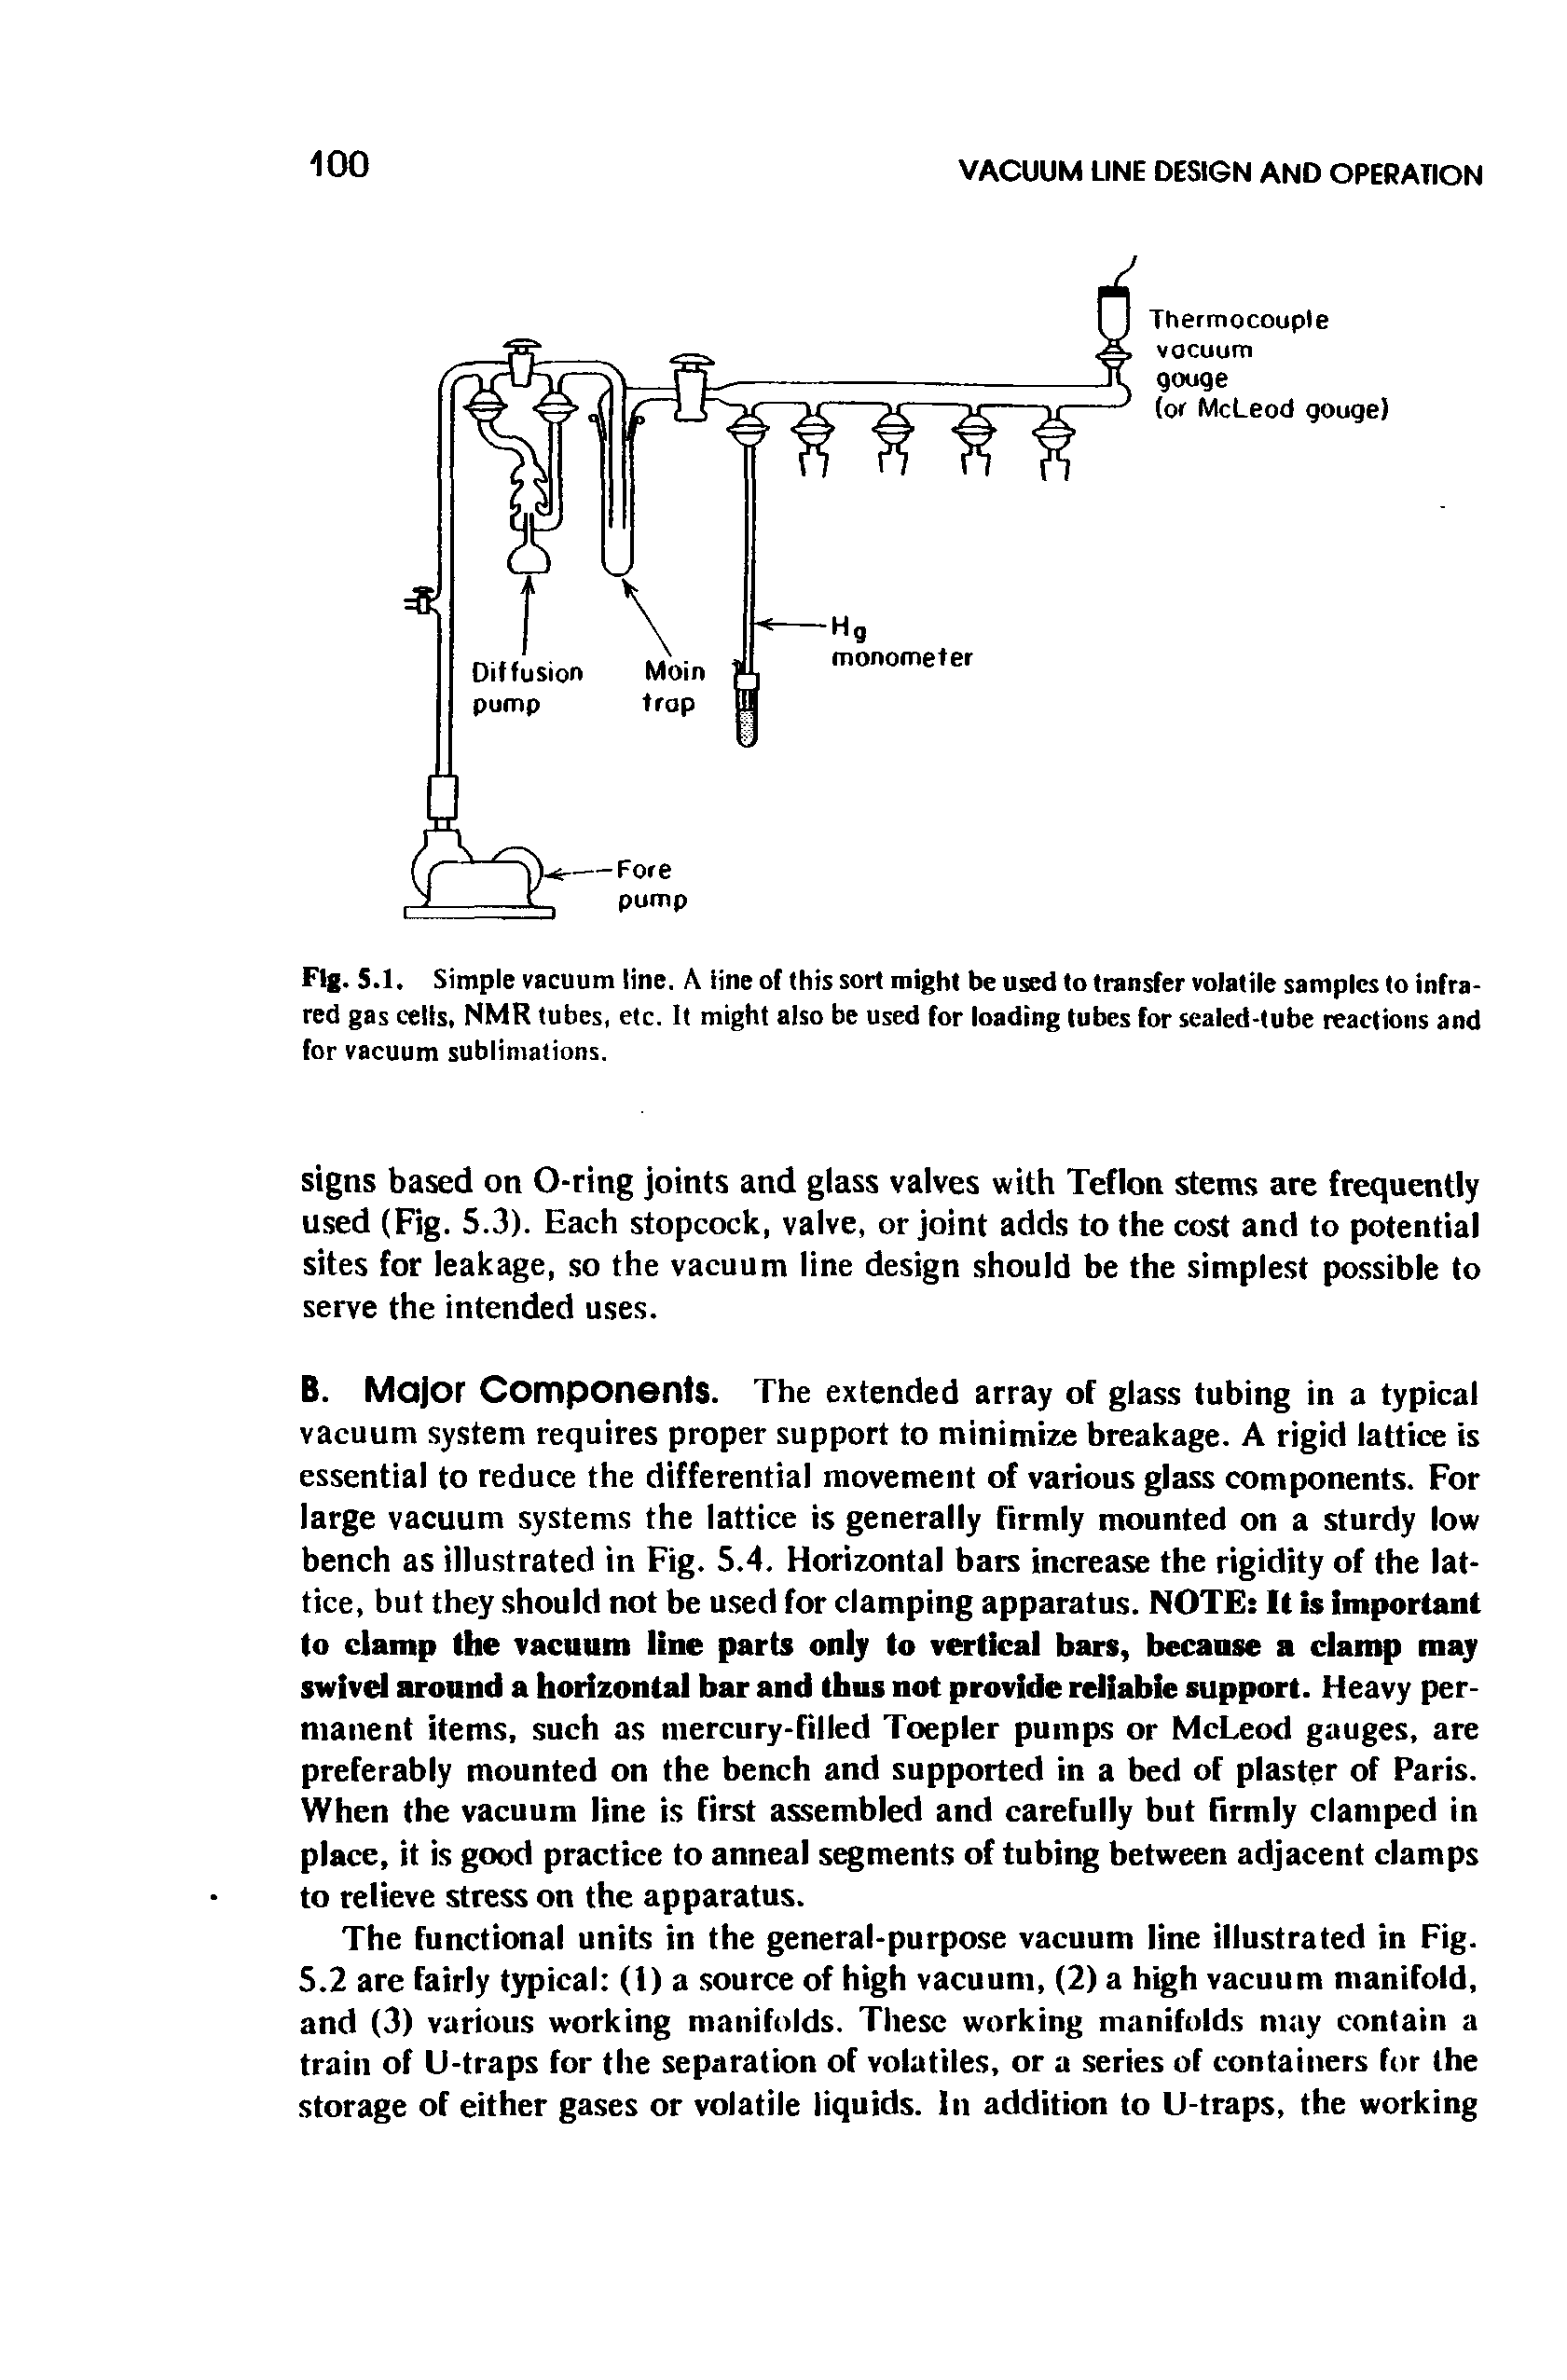 Fig. 5.1. Simple vacuum line. A iineof this sort might be used to transfer volatile samples to infrared gas cells, NMR tubes, etc. It might also be used for loading tubes for sealed-tube reactions and for vacuum sublimations.